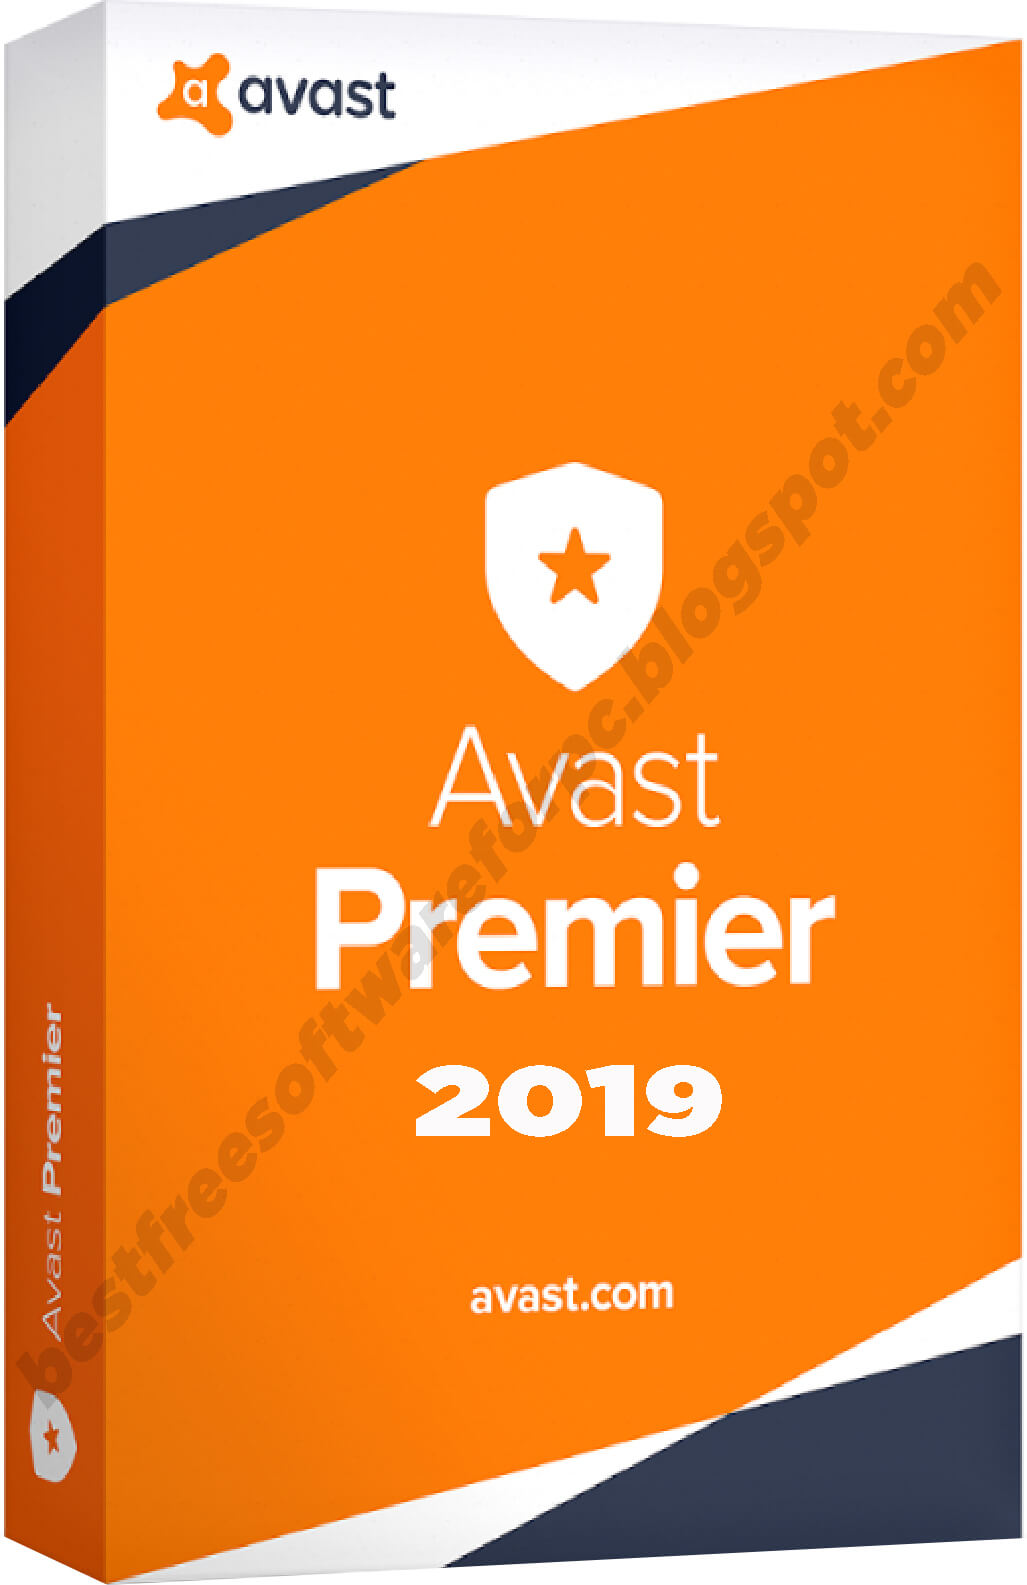 Avast Premier Full Version With Crack Free Download Macbook Pro